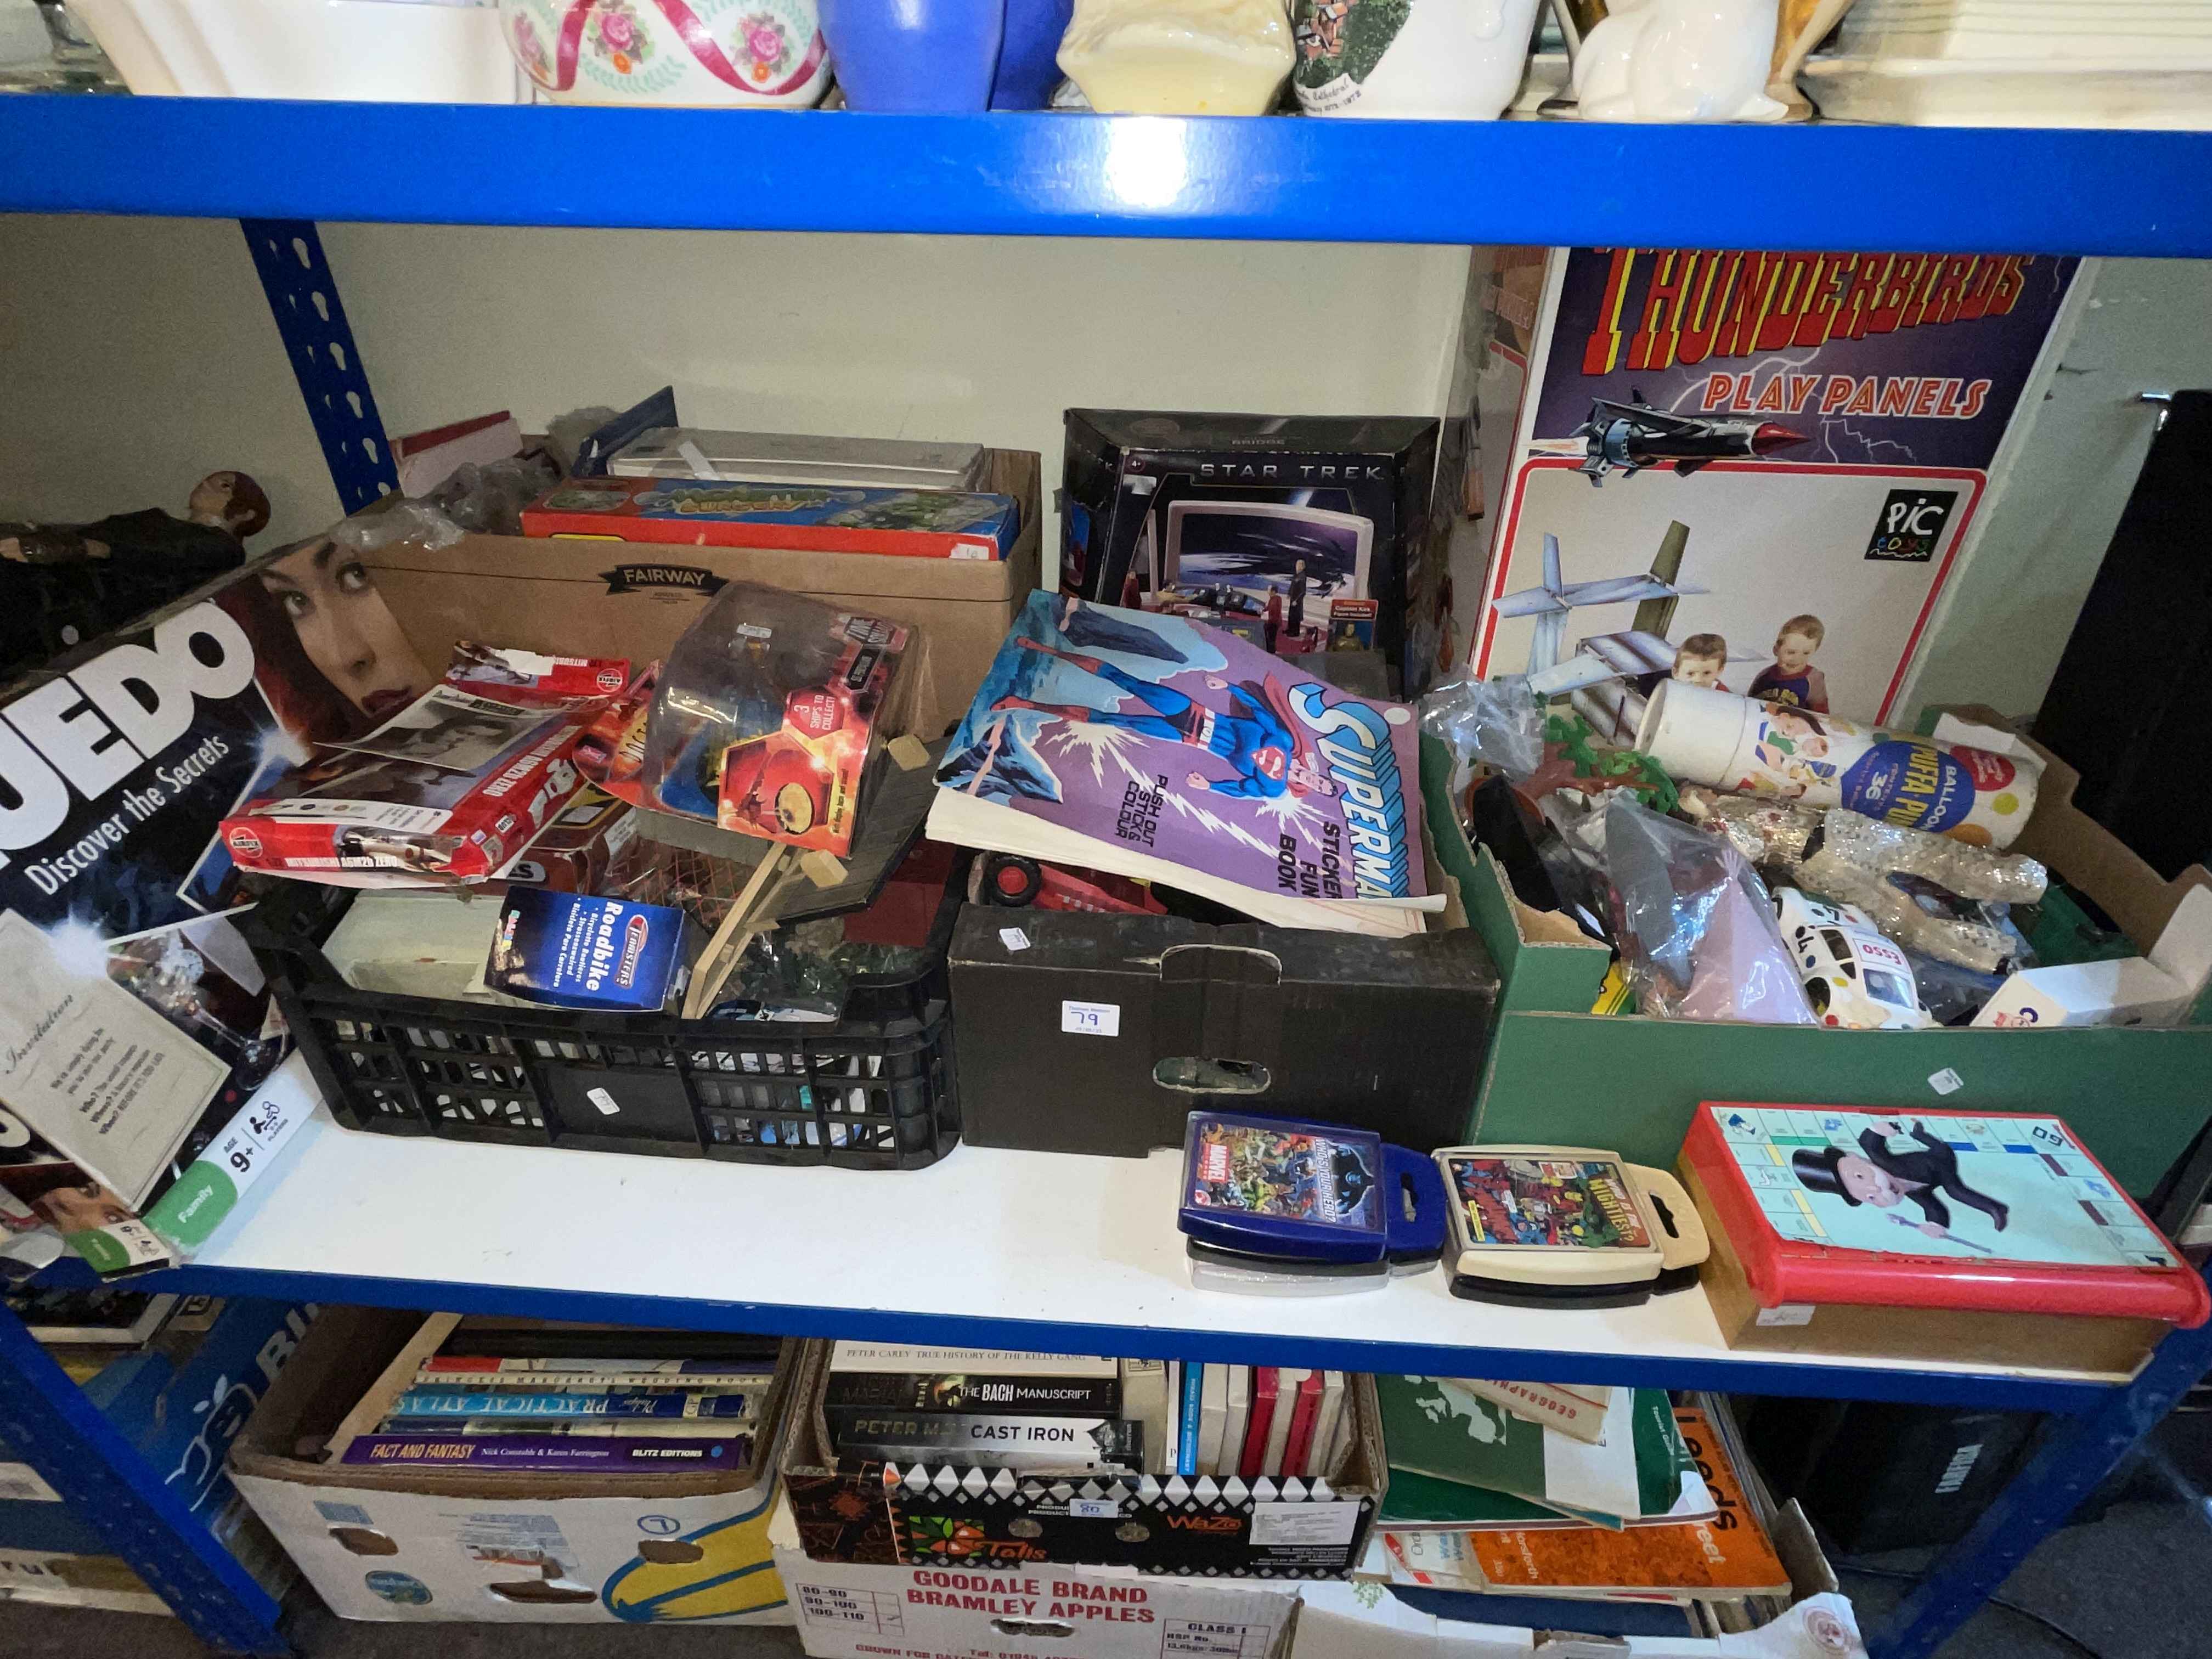 Collection of children's books, games, toys, wicker baskets, plans, Farfisa keyboard, etc. - Image 2 of 5